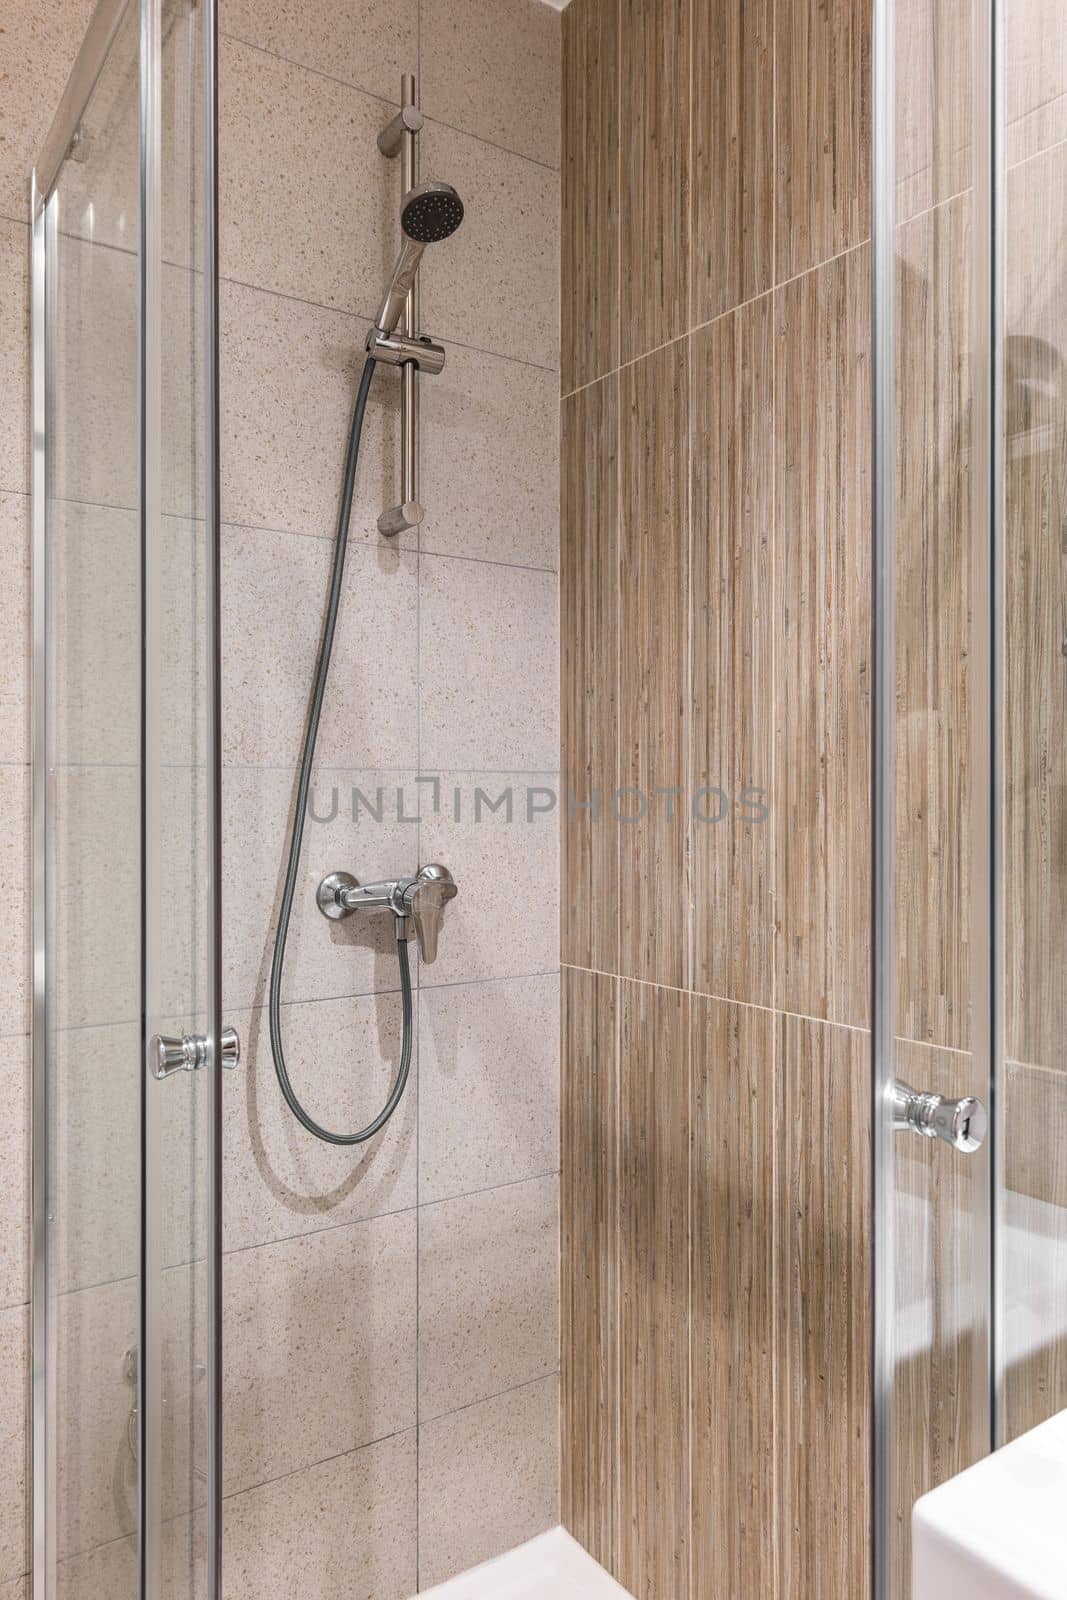 Shower area with marble tiles on the walls. On the wall is a faucet with a long hose and a shower head. Area is fenced with glass doors to protect against splashing water. by apavlin